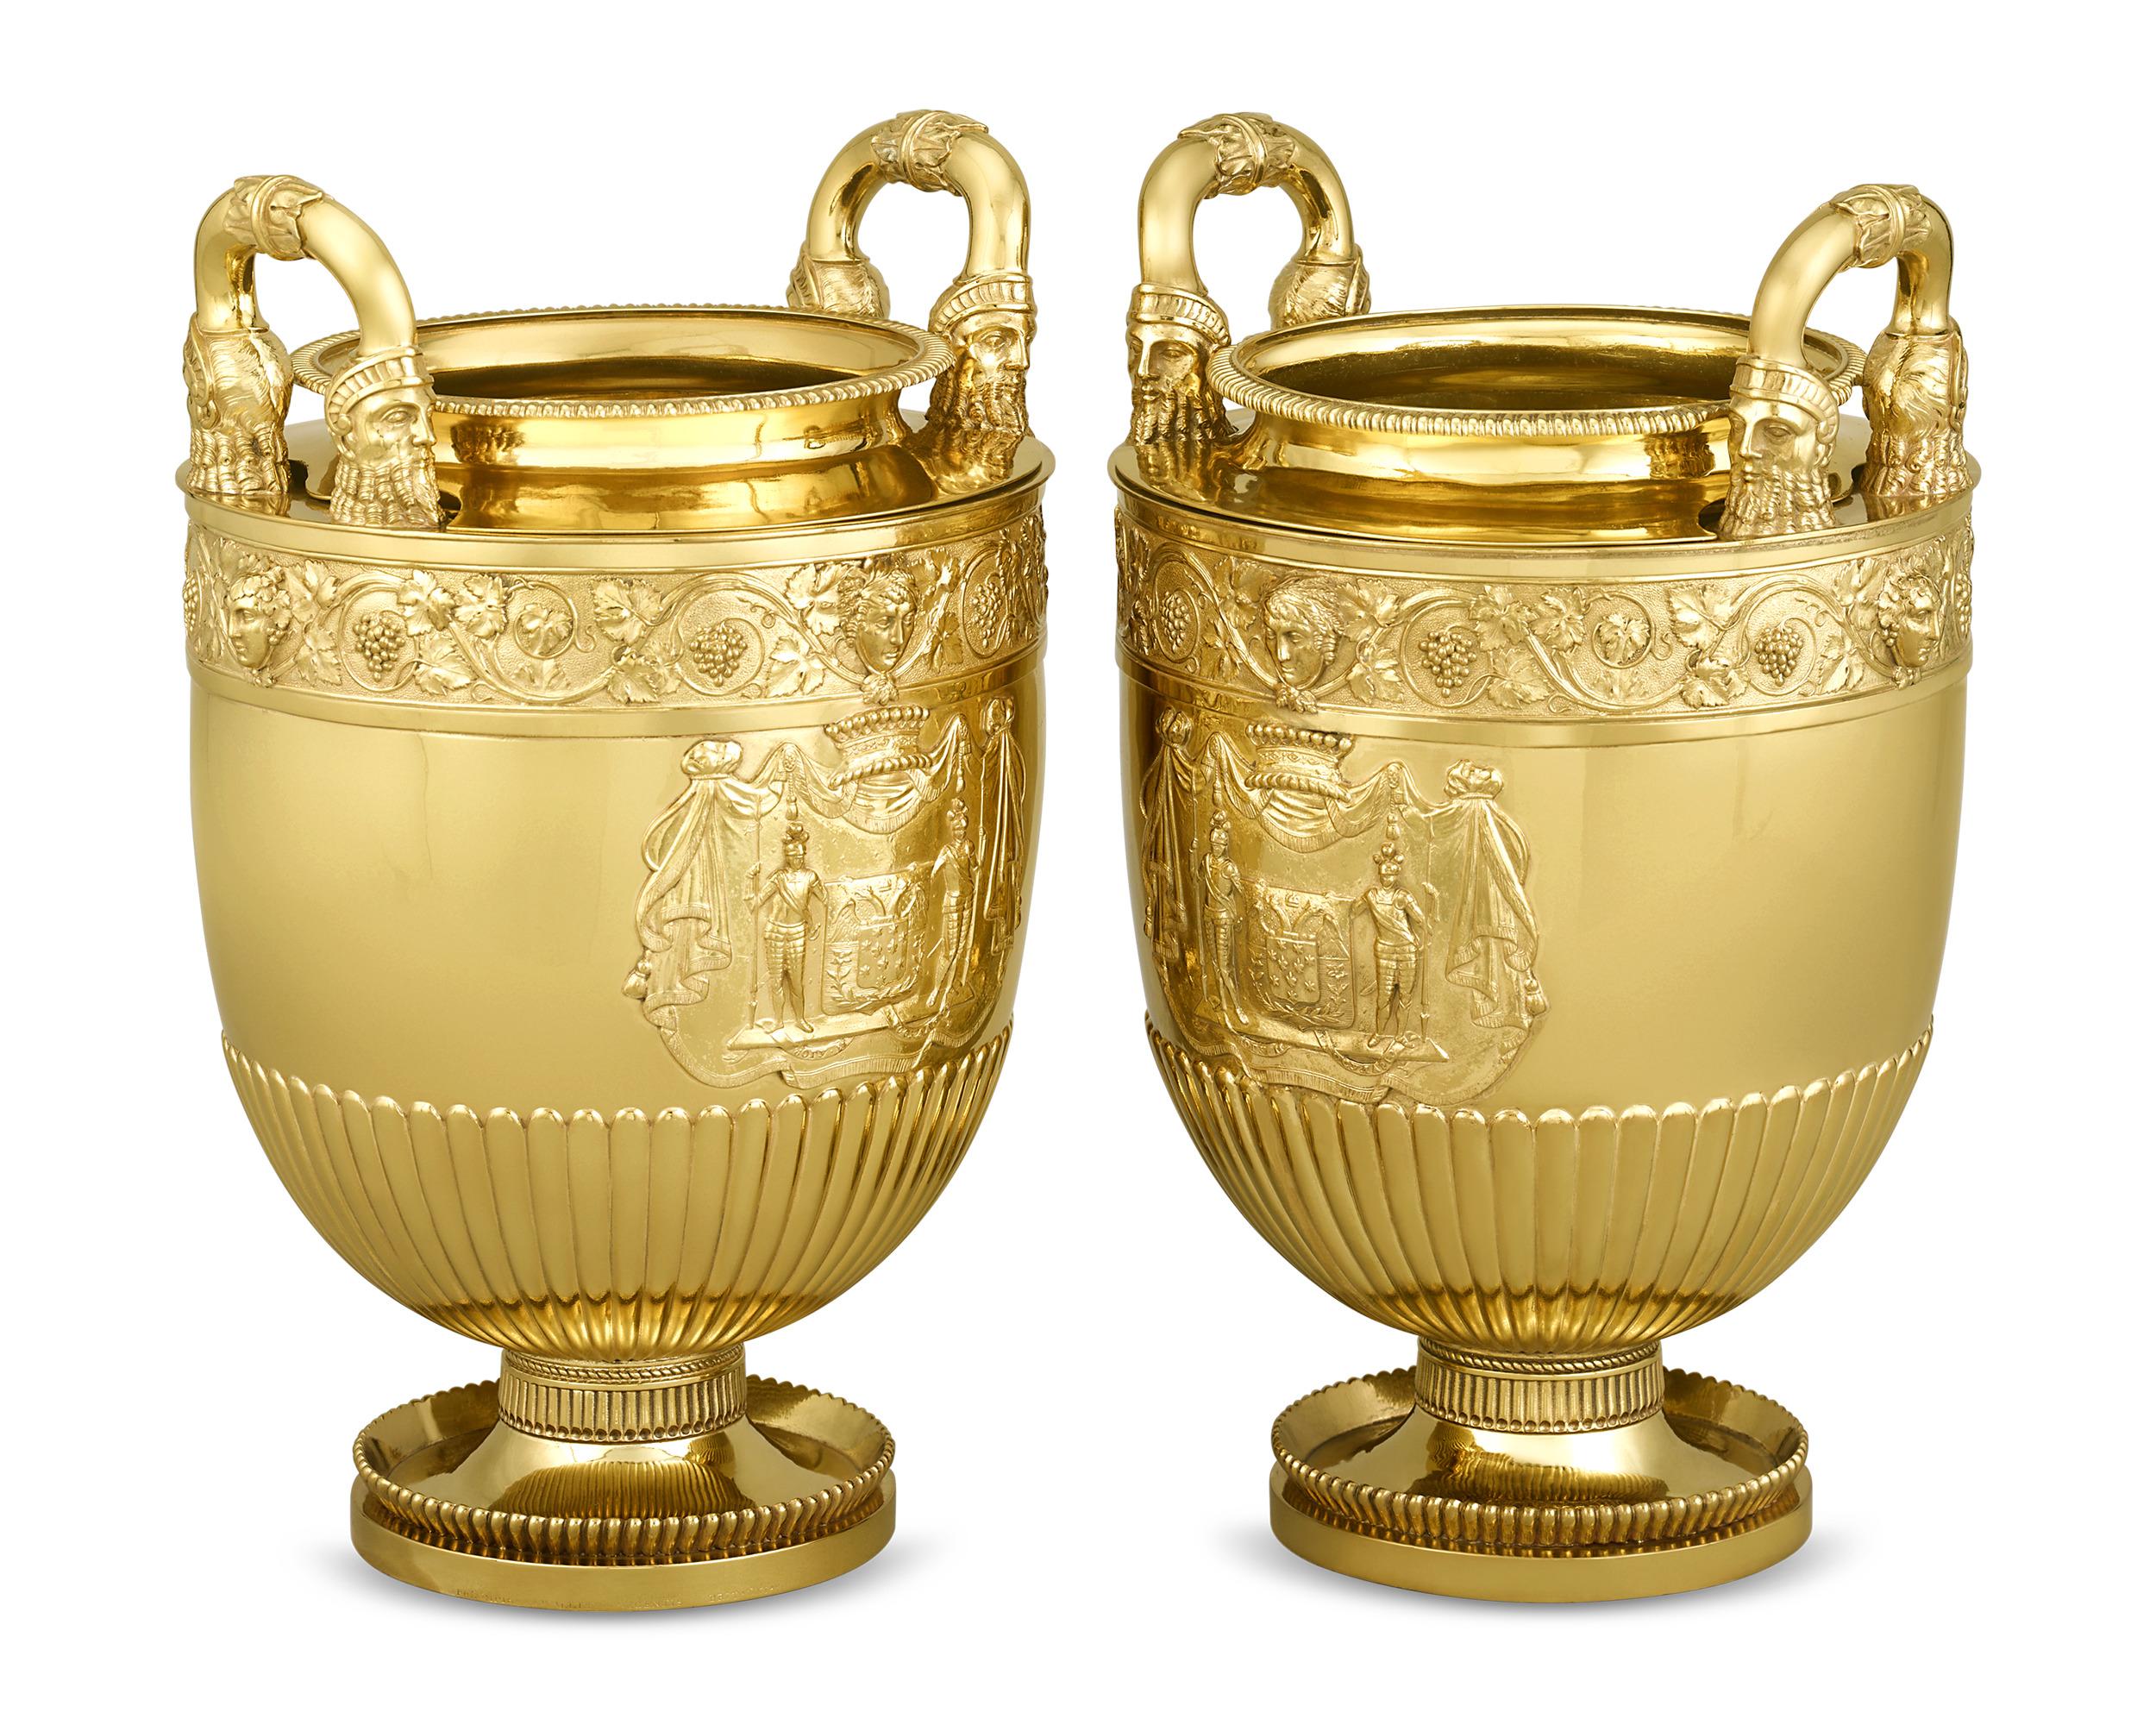 This matching pair of resplendent, silver-gilt wine coolers hail from the workshop of the famed silversmith Paul Storr. The set was created for Prince Christoph and Princess Dorothea of Lieven, a very important 19th-century Russian diplomatic